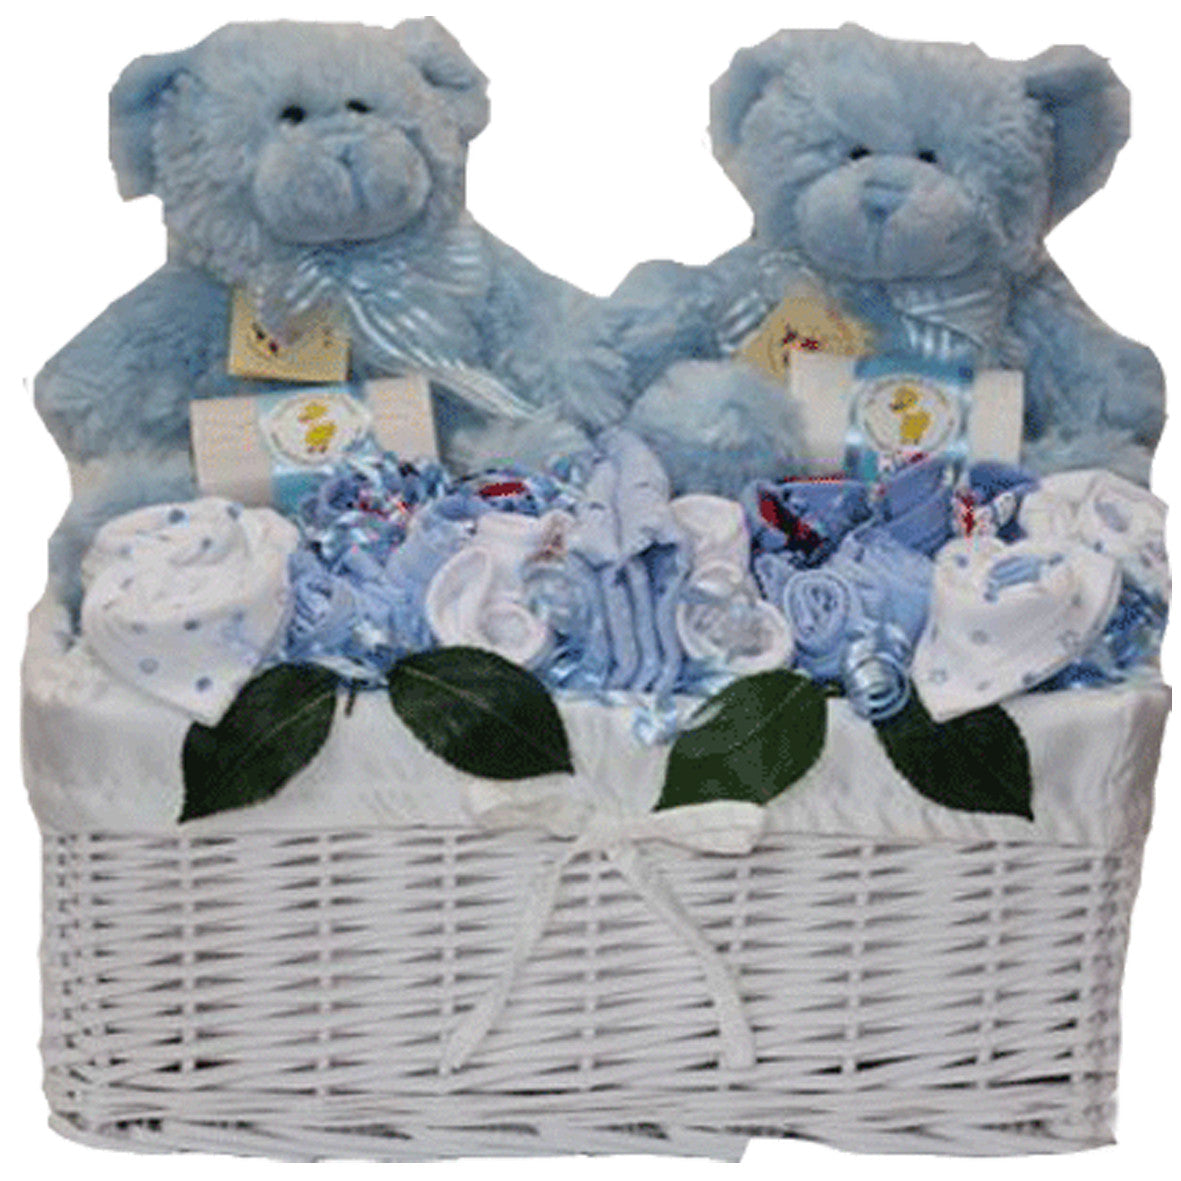 twin baby boy gift basket blue teddy bears and baby clothing